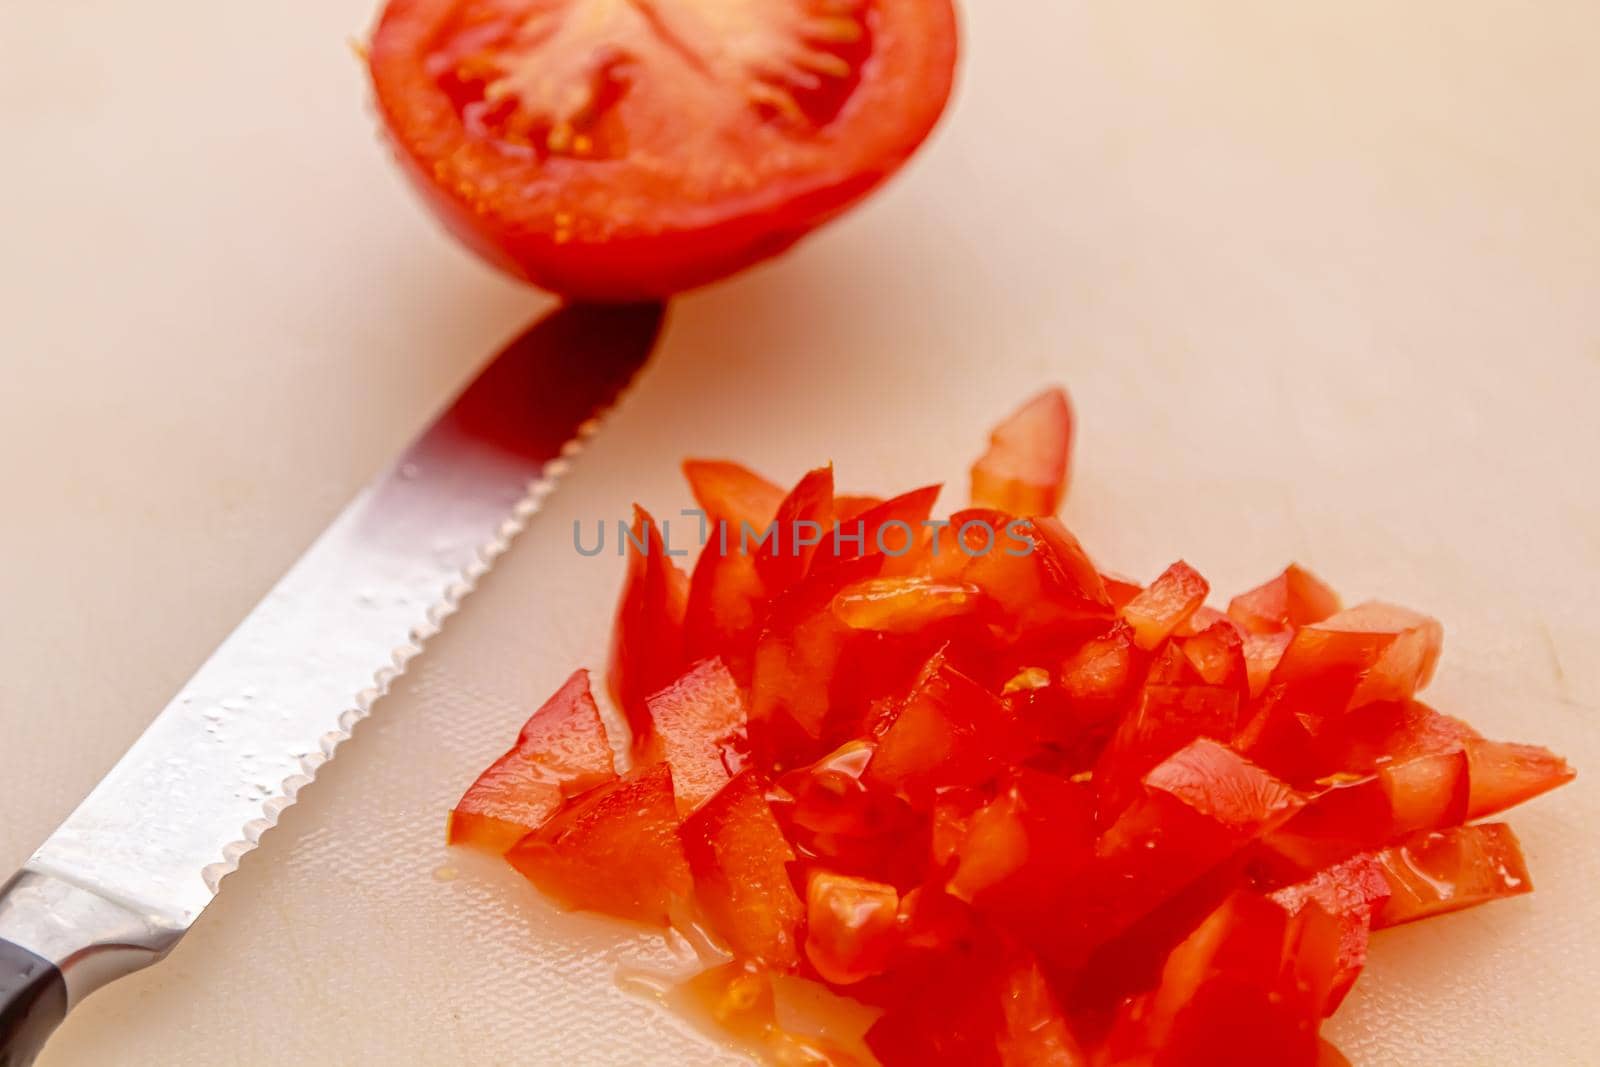 cutting board with a knife and tomato isolated on a white background.